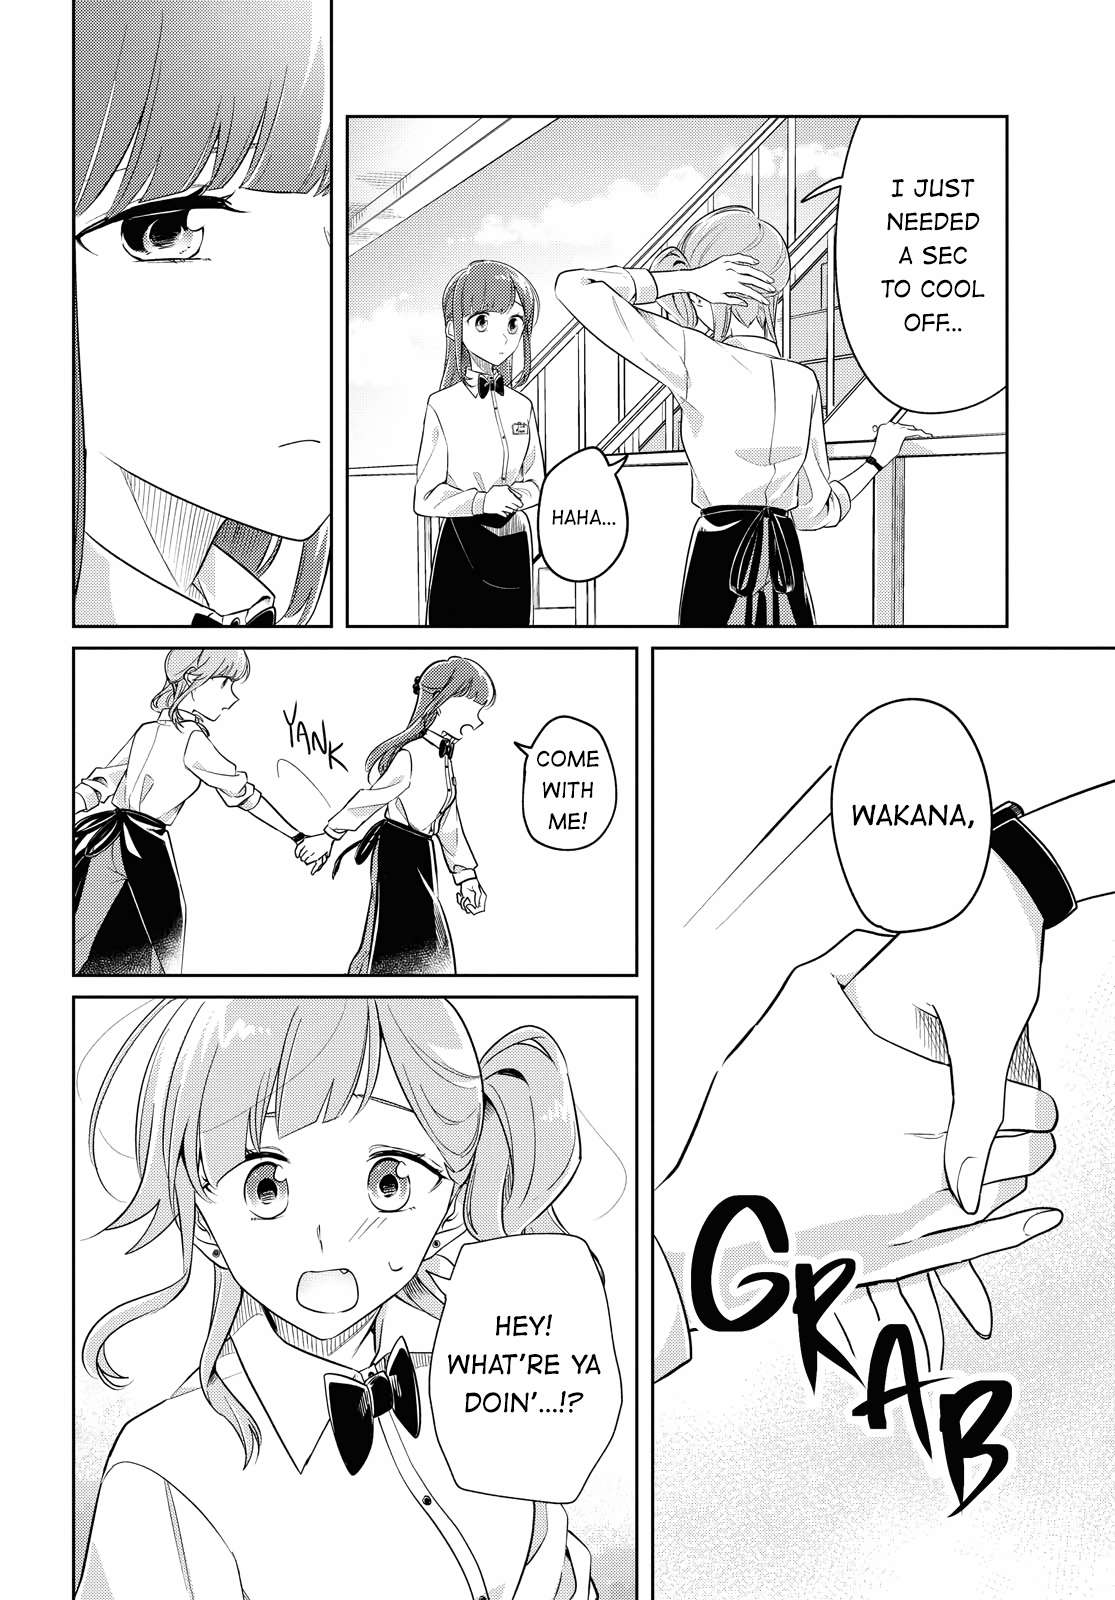 I Can’t Say No to the Lonely Girl - chapter 20 - #2